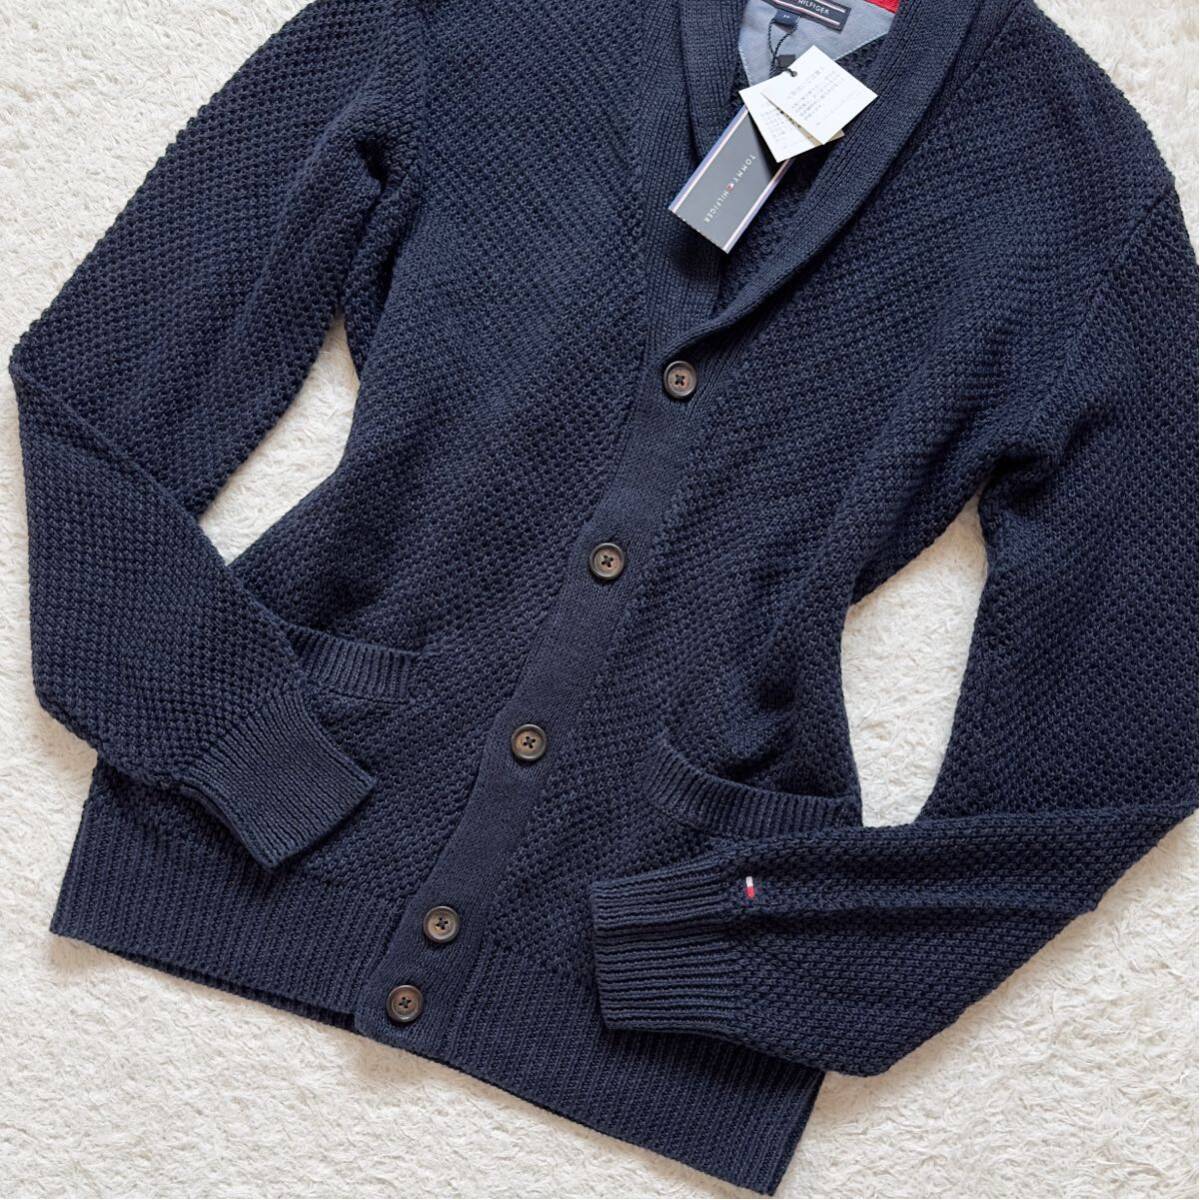  unused tag attaching / Tommy Hilfiger TOMMY HILFIGER summer knitted jacket cardigan shawl color linen100% flax navy navy blue M